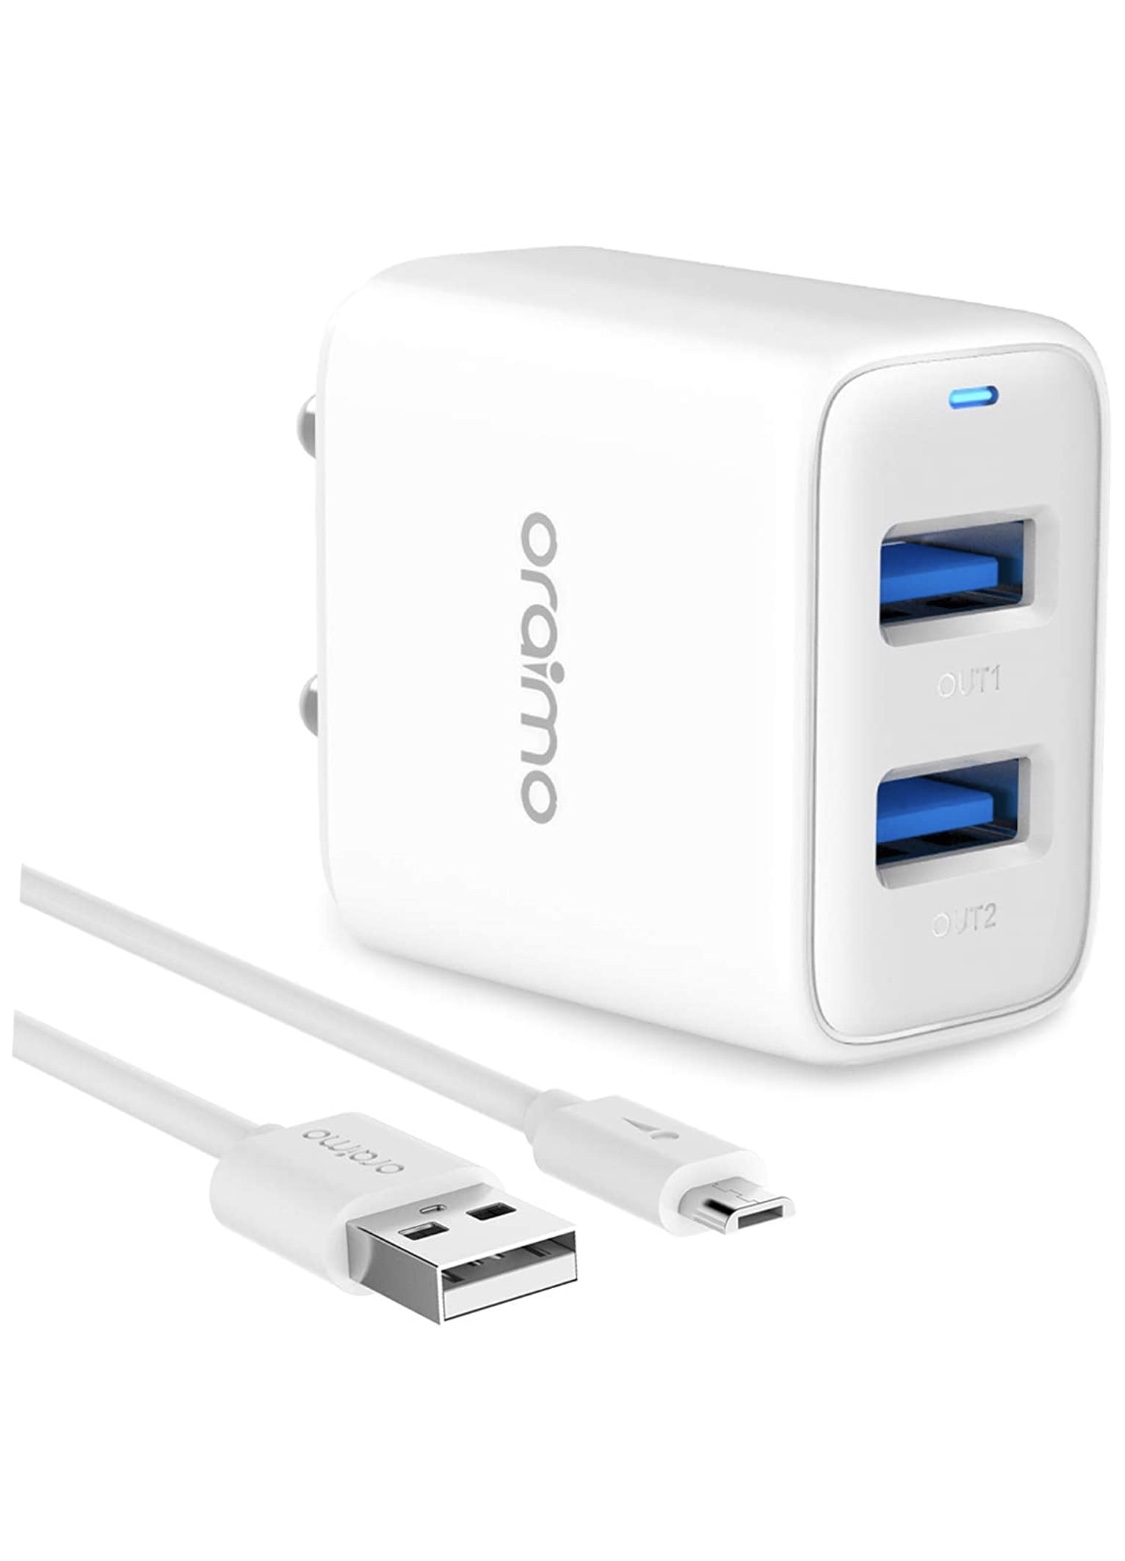 oraimo Firefly 2 5.0V/2.1A Dual USB Fast Wall Charger Micro USB Cable with Multi Protection